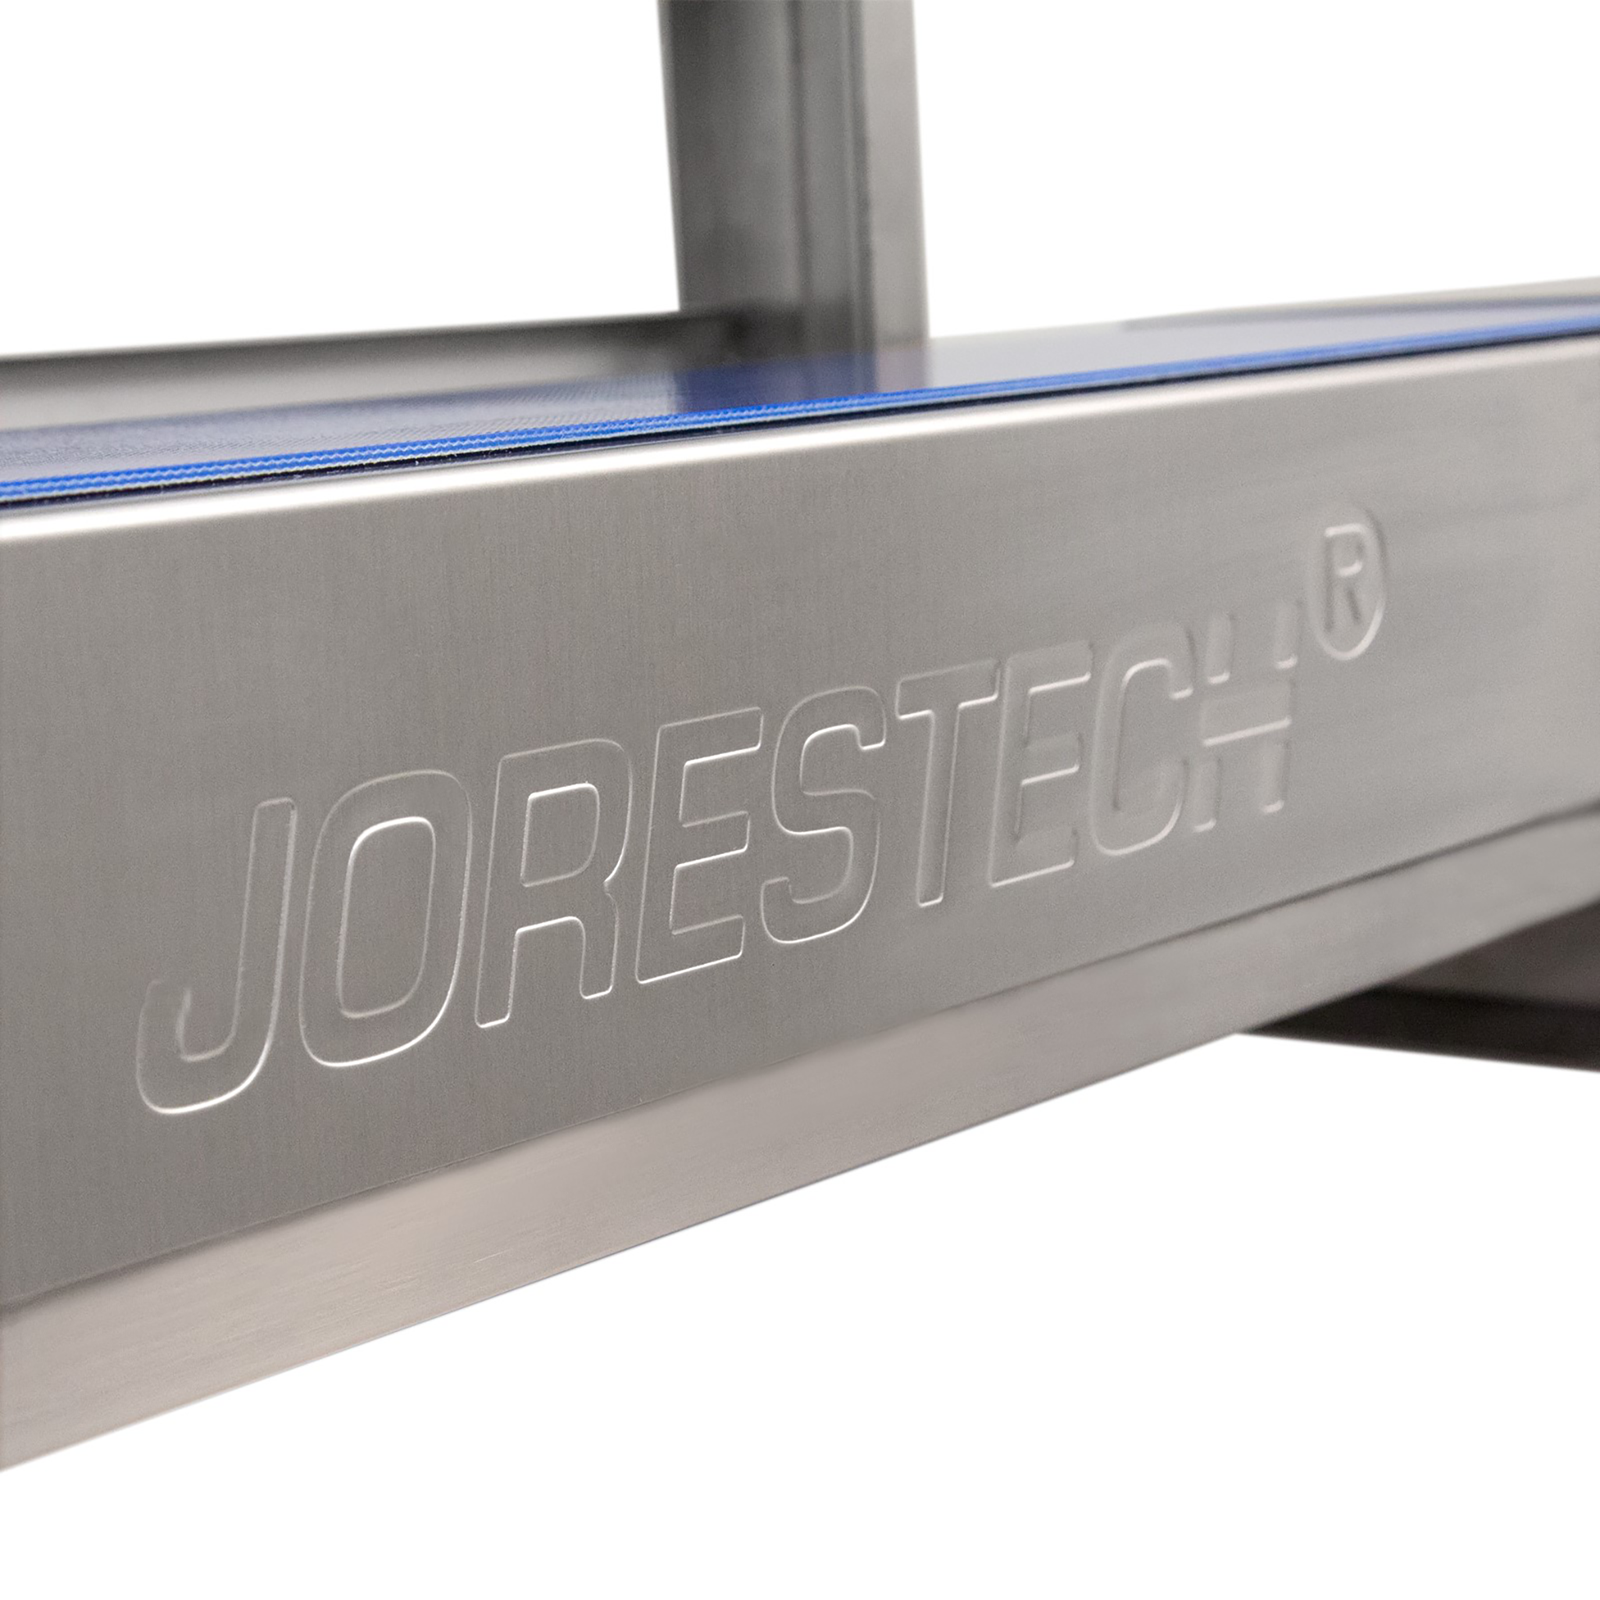 JORESTECH logo embossed on the stainless steel of the table top JORESTECH continuous band sealer